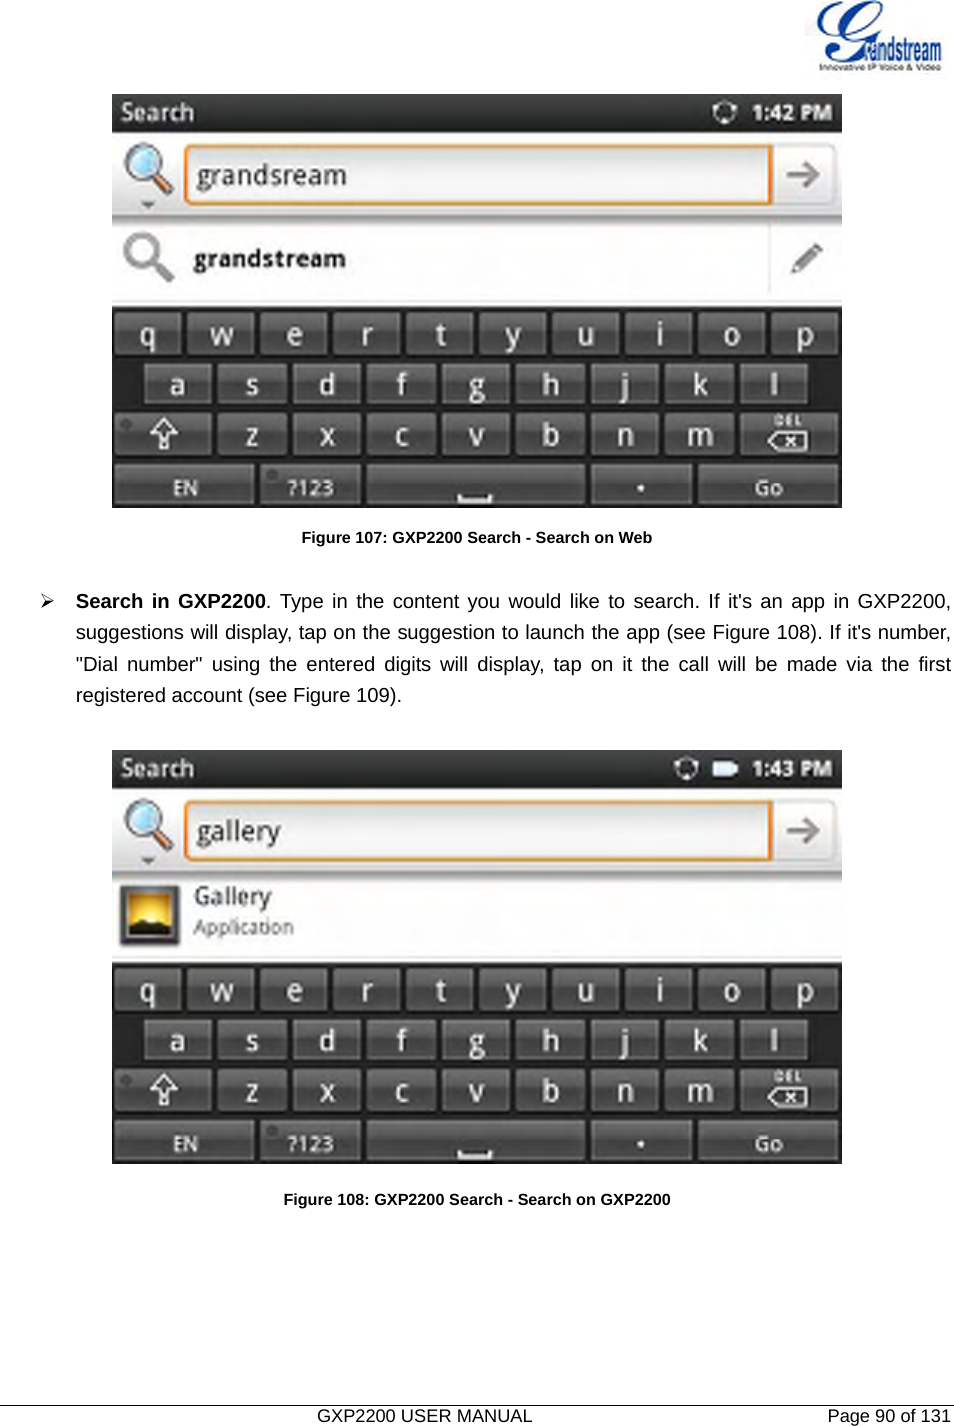   GXP2200 USER MANUAL       Page 90 of 131                                   Figure 107: GXP2200 Search - Search on Web  ¾ Search in GXP2200. Type in the content you would like to search. If it&apos;s an app in GXP2200, suggestions will display, tap on the suggestion to launch the app (see Figure 108). If it&apos;s number, &quot;Dial number&quot; using the entered digits will display, tap on it the call will be made via the first registered account (see Figure 109). Figure 108: GXP2200 Search - Search on GXP2200 